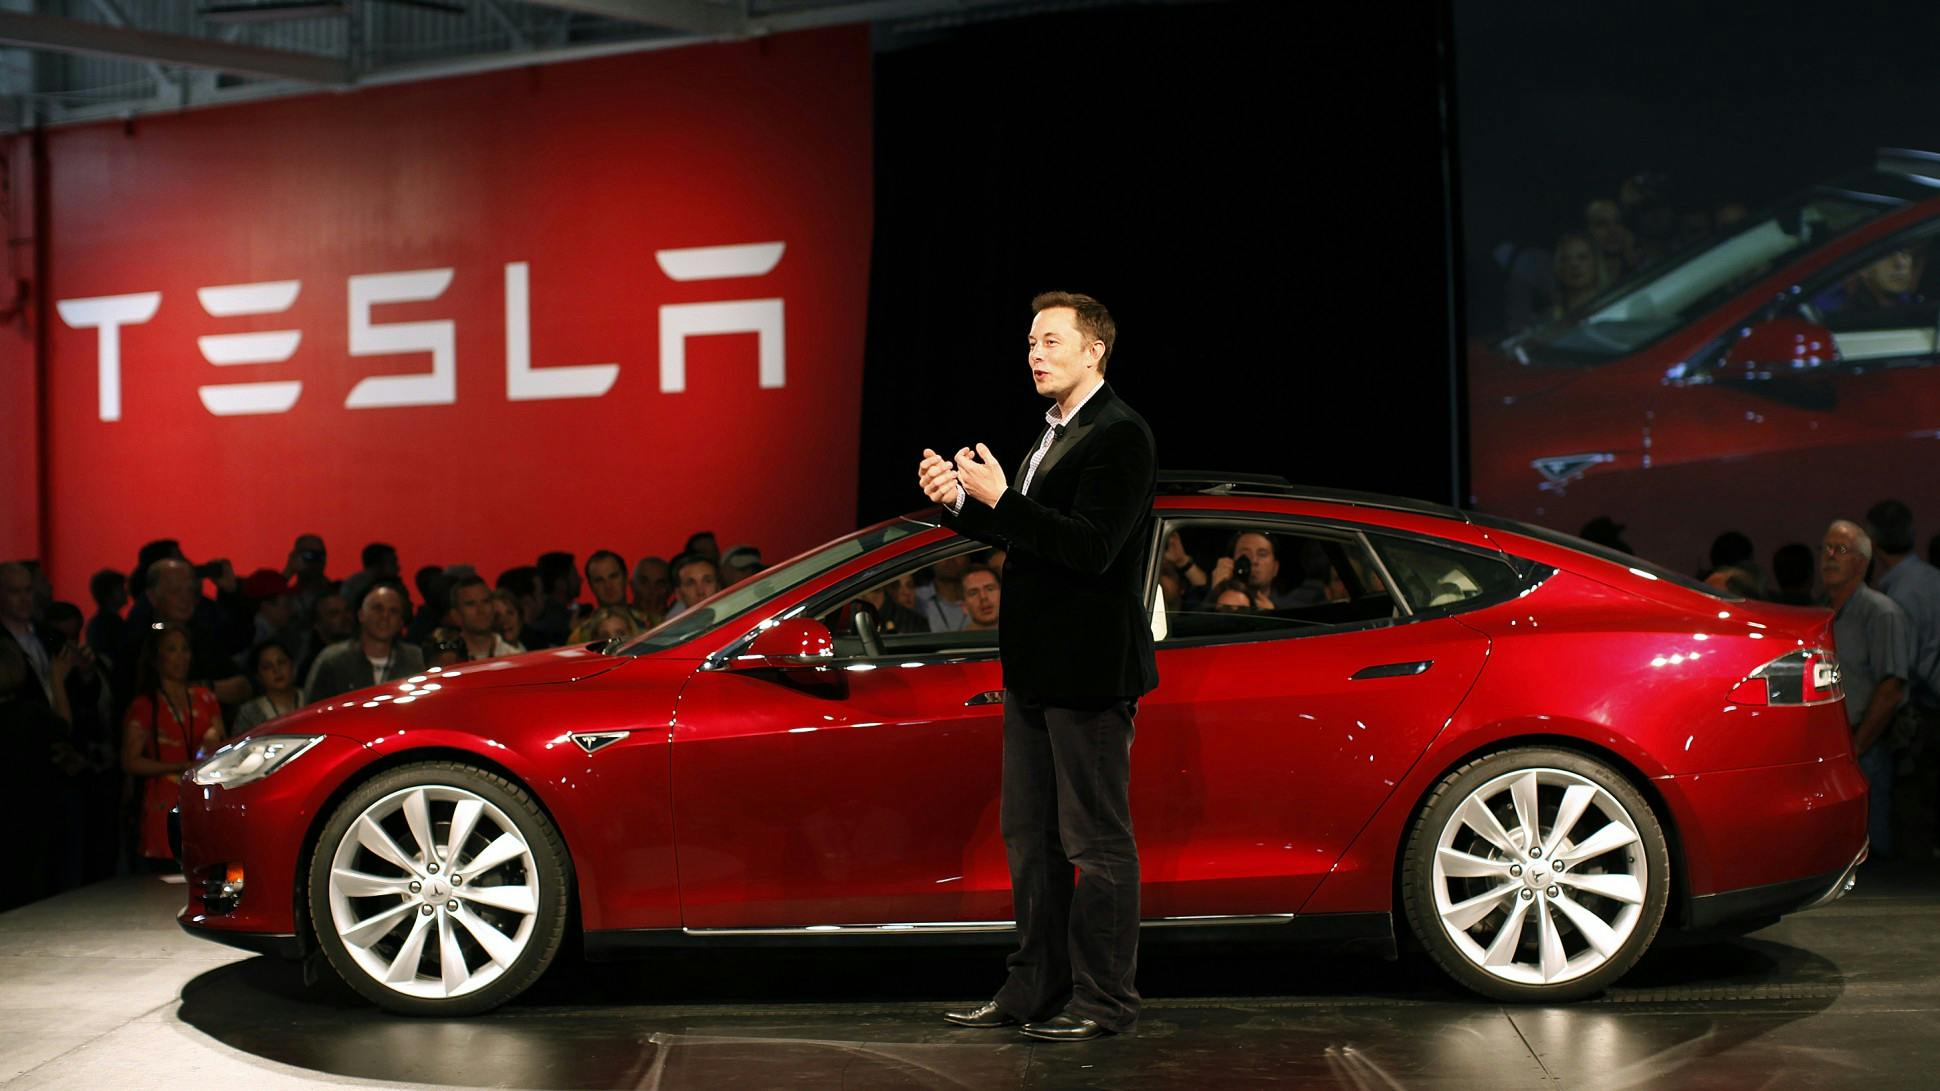 Tesla stock is worth more than Ford